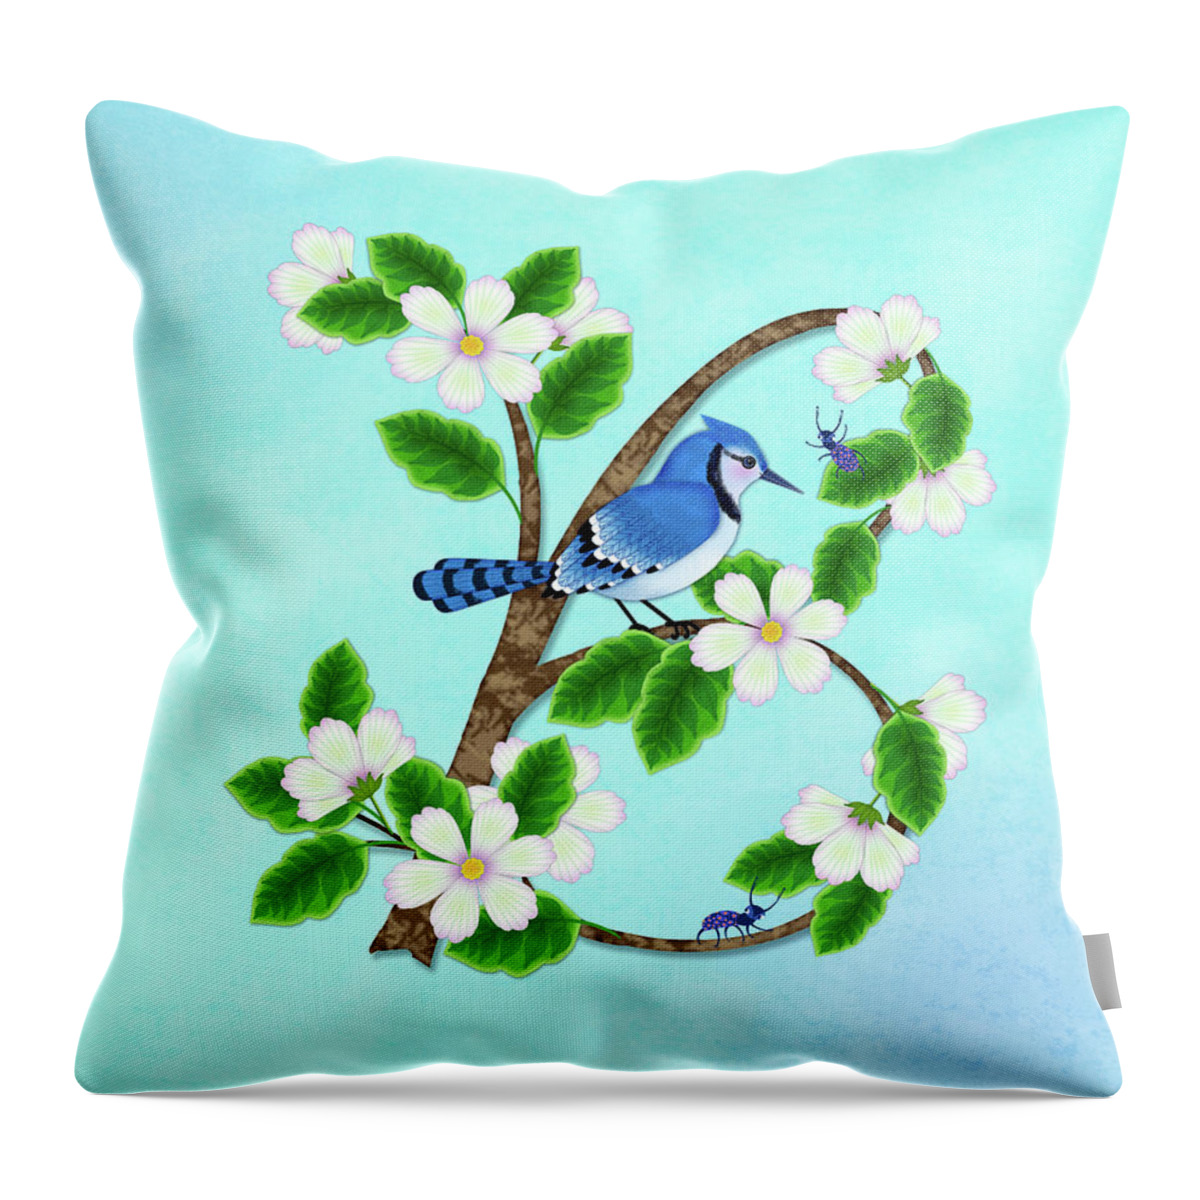 Letter B Throw Pillow featuring the digital art B is for Blossoming Branch and Bird by Valerie Drake Lesiak